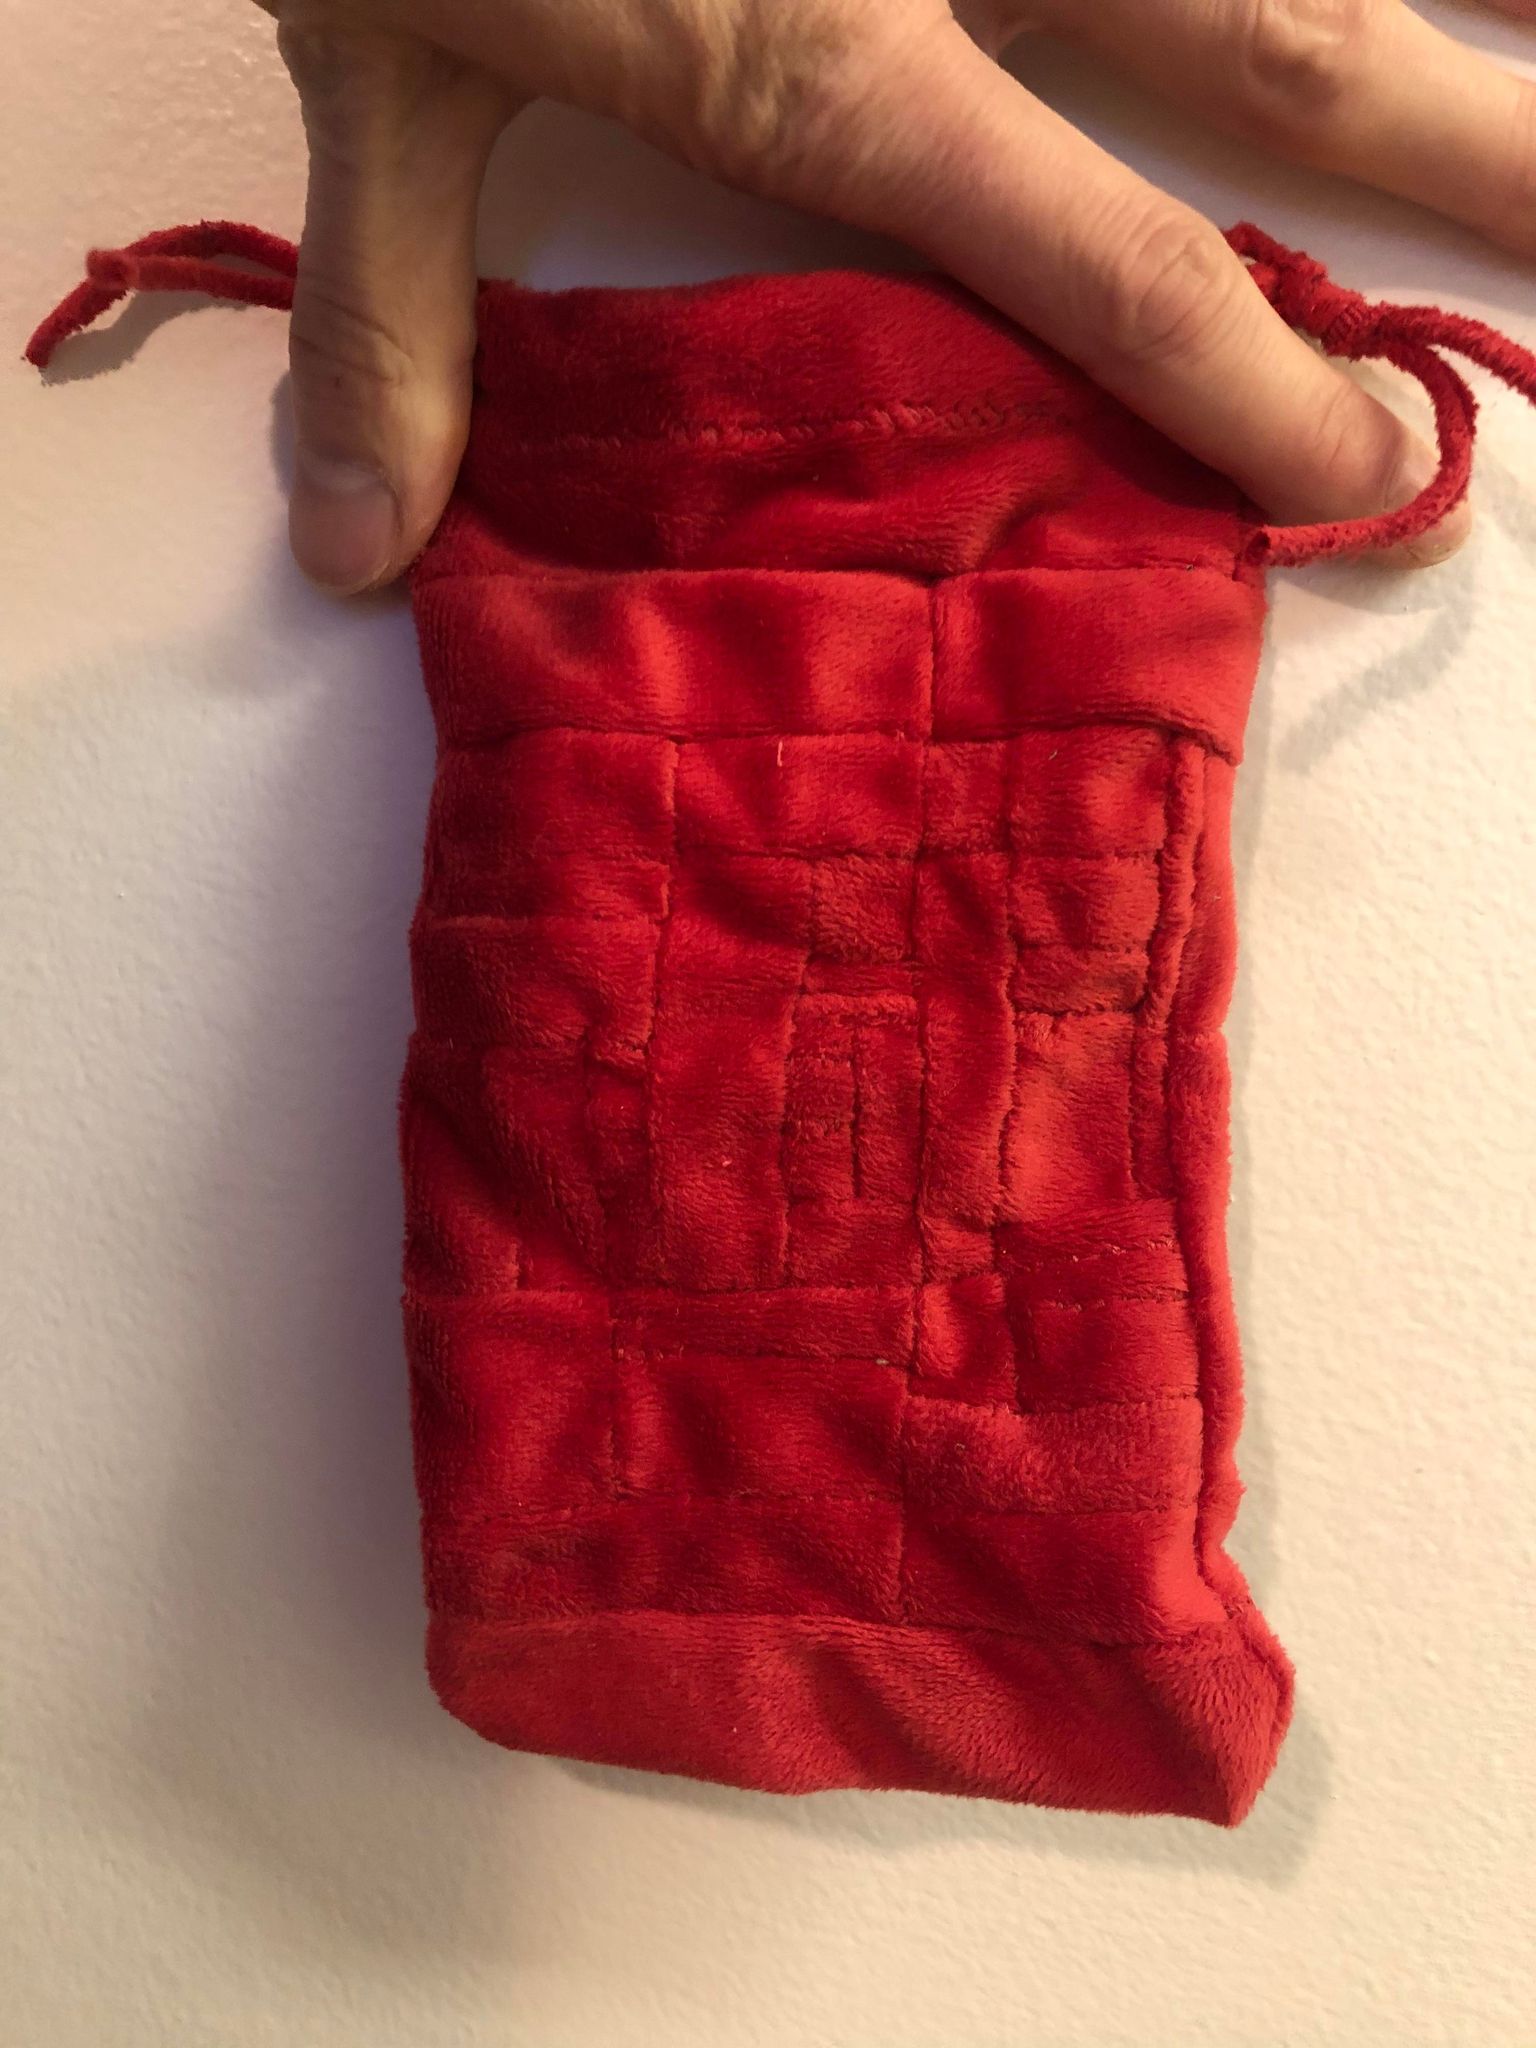 The other side of the bag, almost appearing as though wider bands are around the edges and it closes in towards smaller ones in the middle. The drawstring hangs to the right.